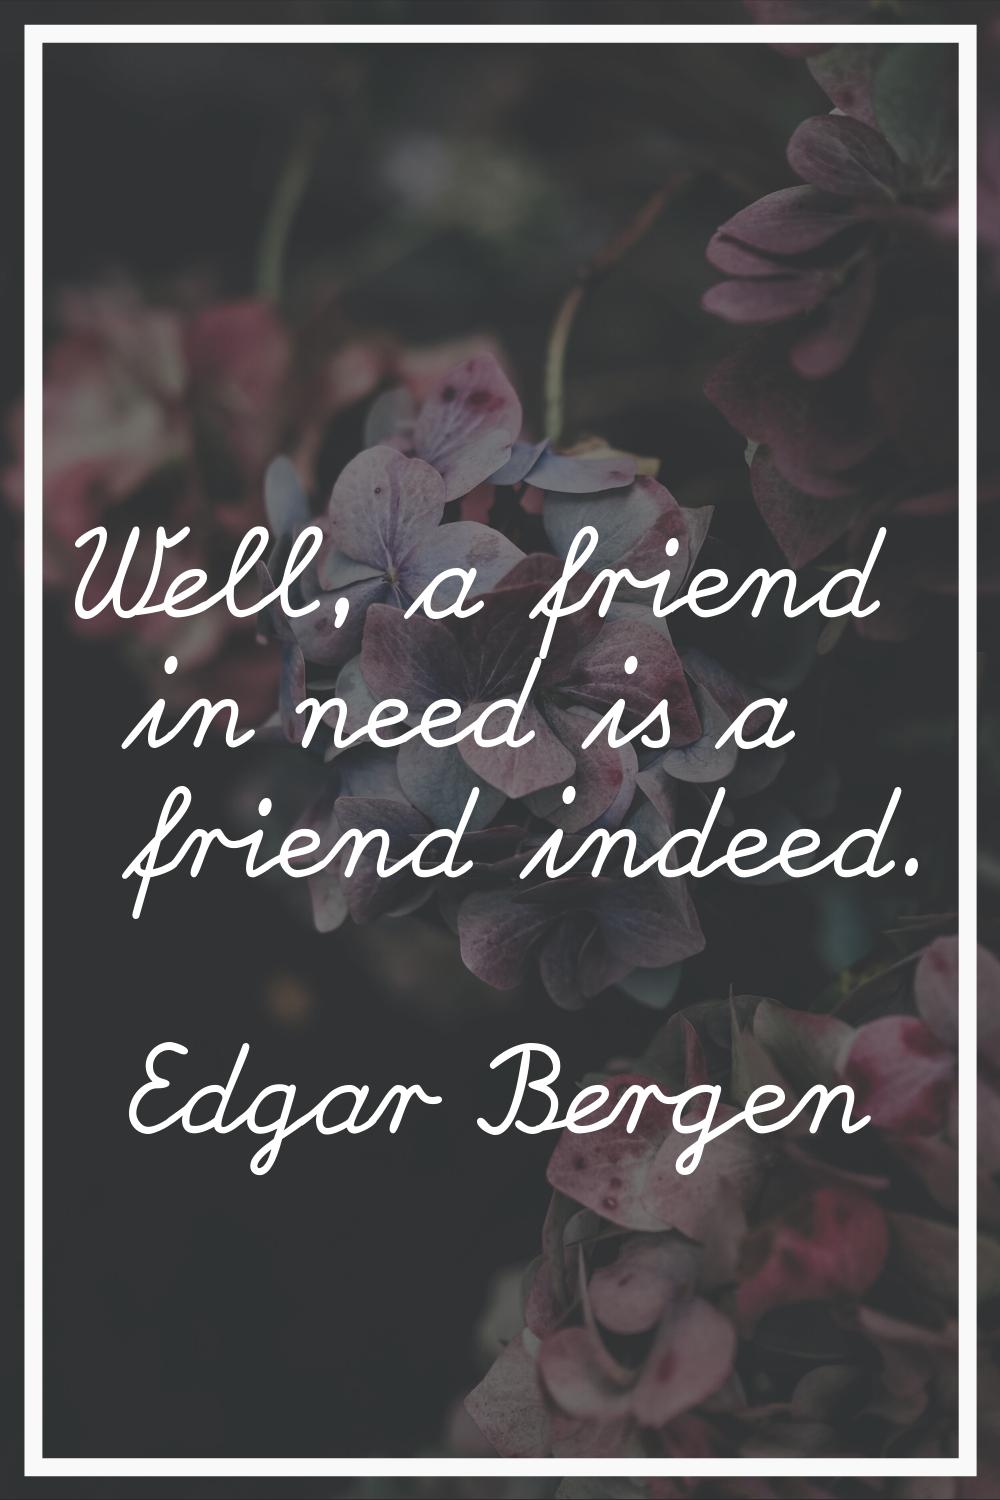 Well, a friend in need is a friend indeed.